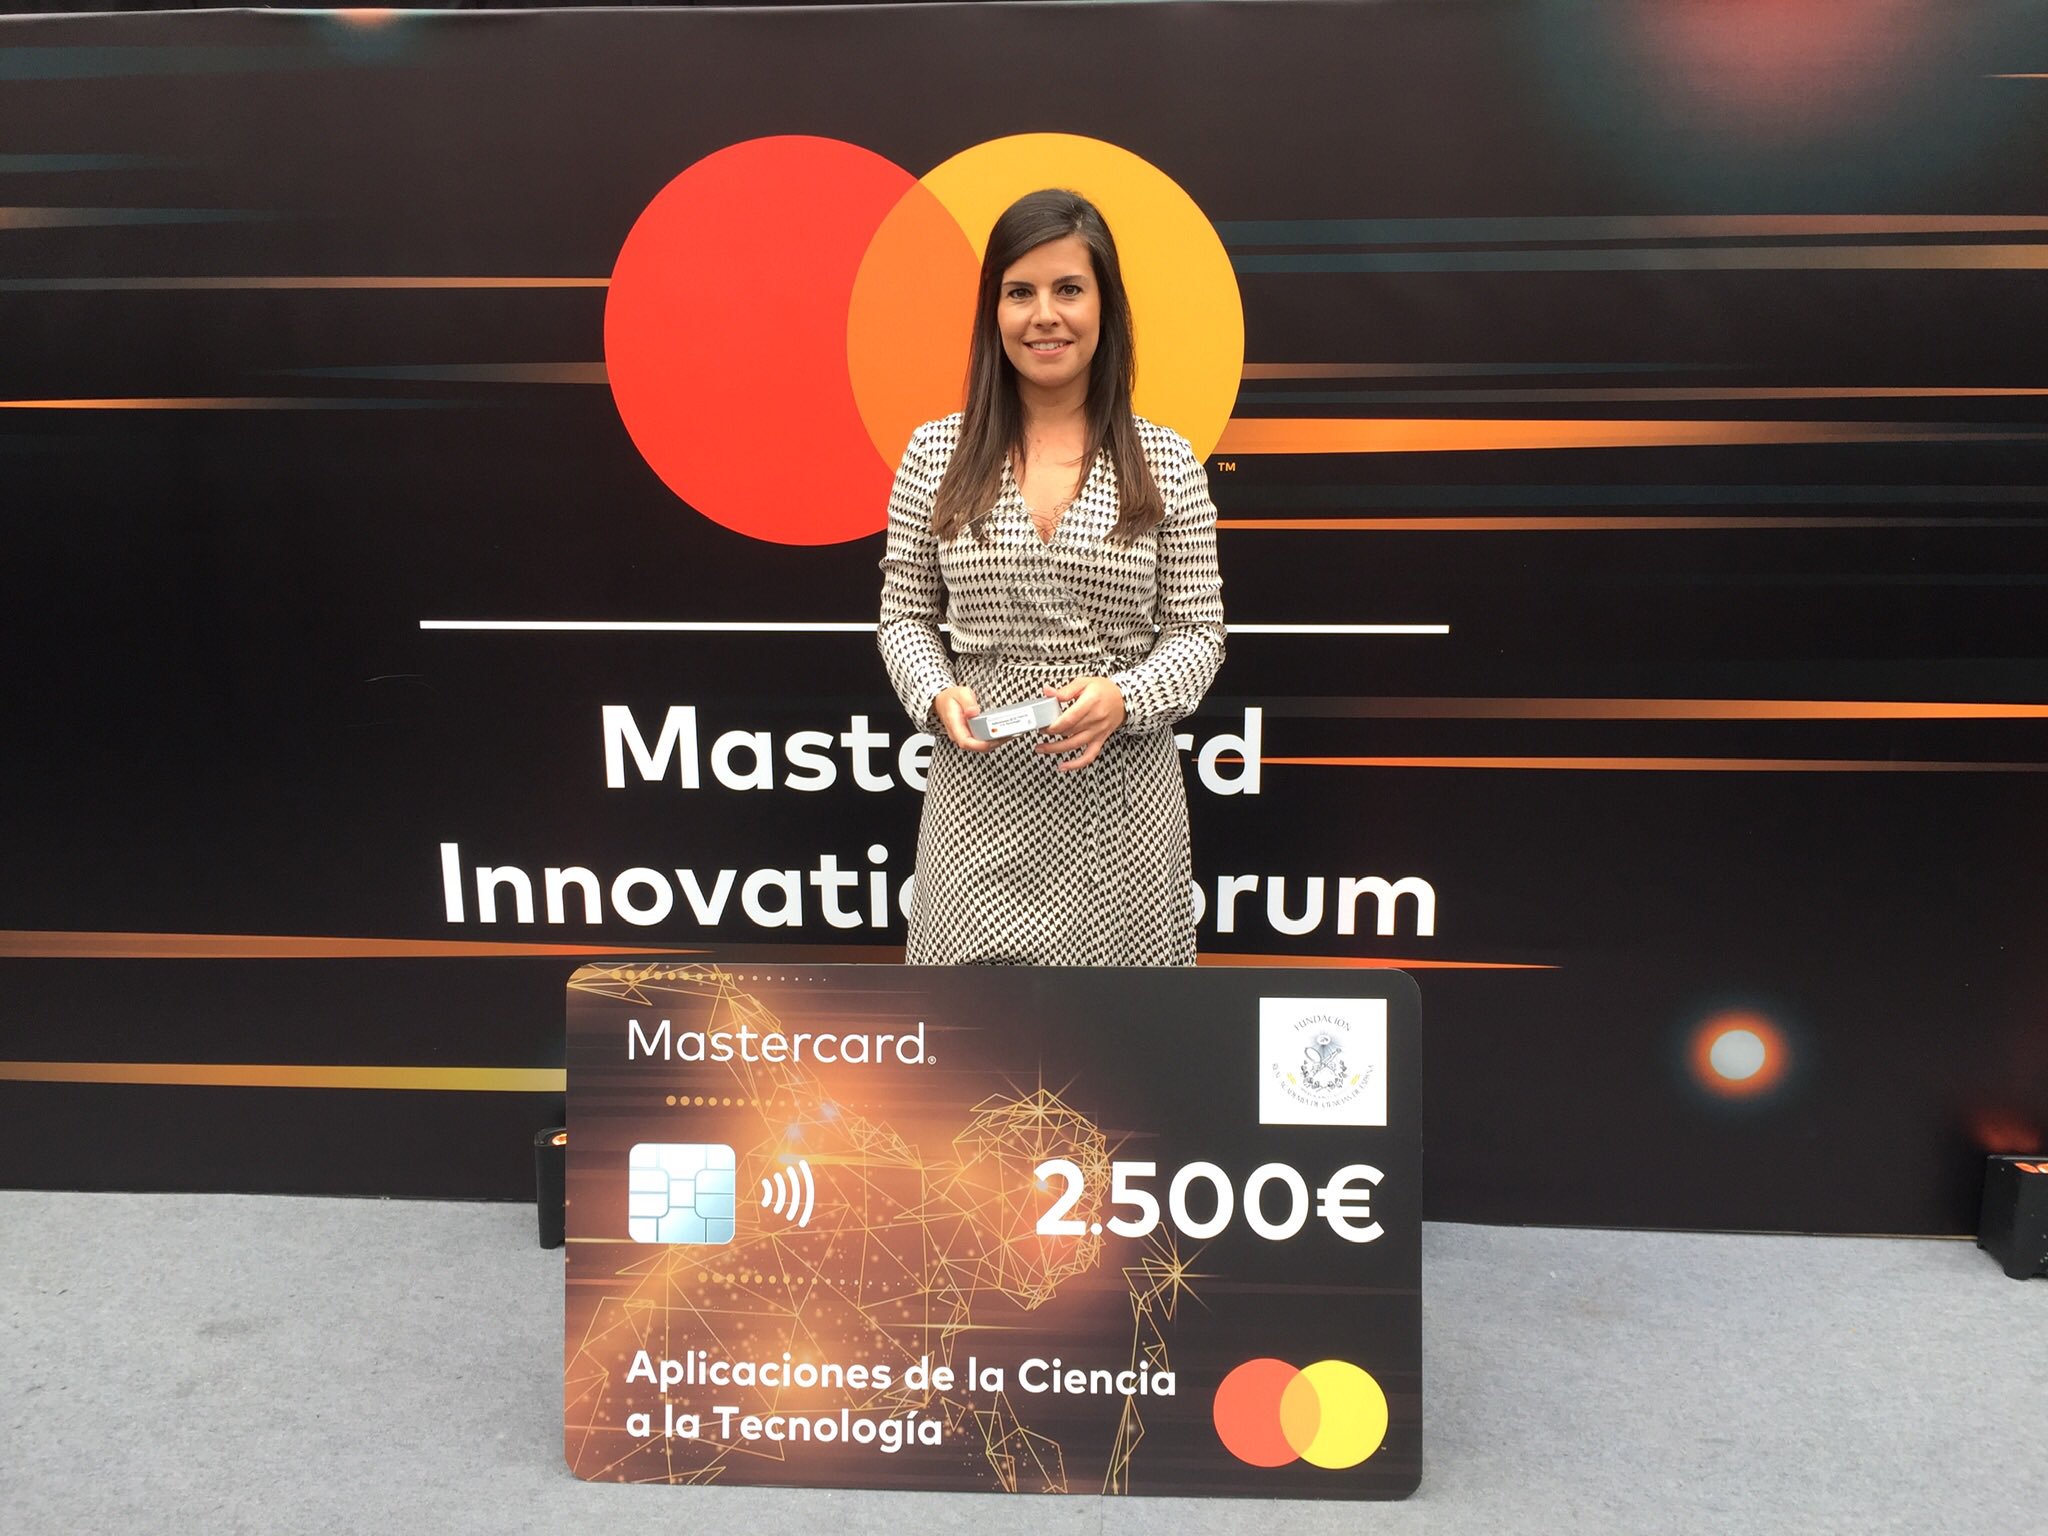 Ana Freire awarded by the Fundation of the Royal Spanish Academy of Sciences and Mastercard